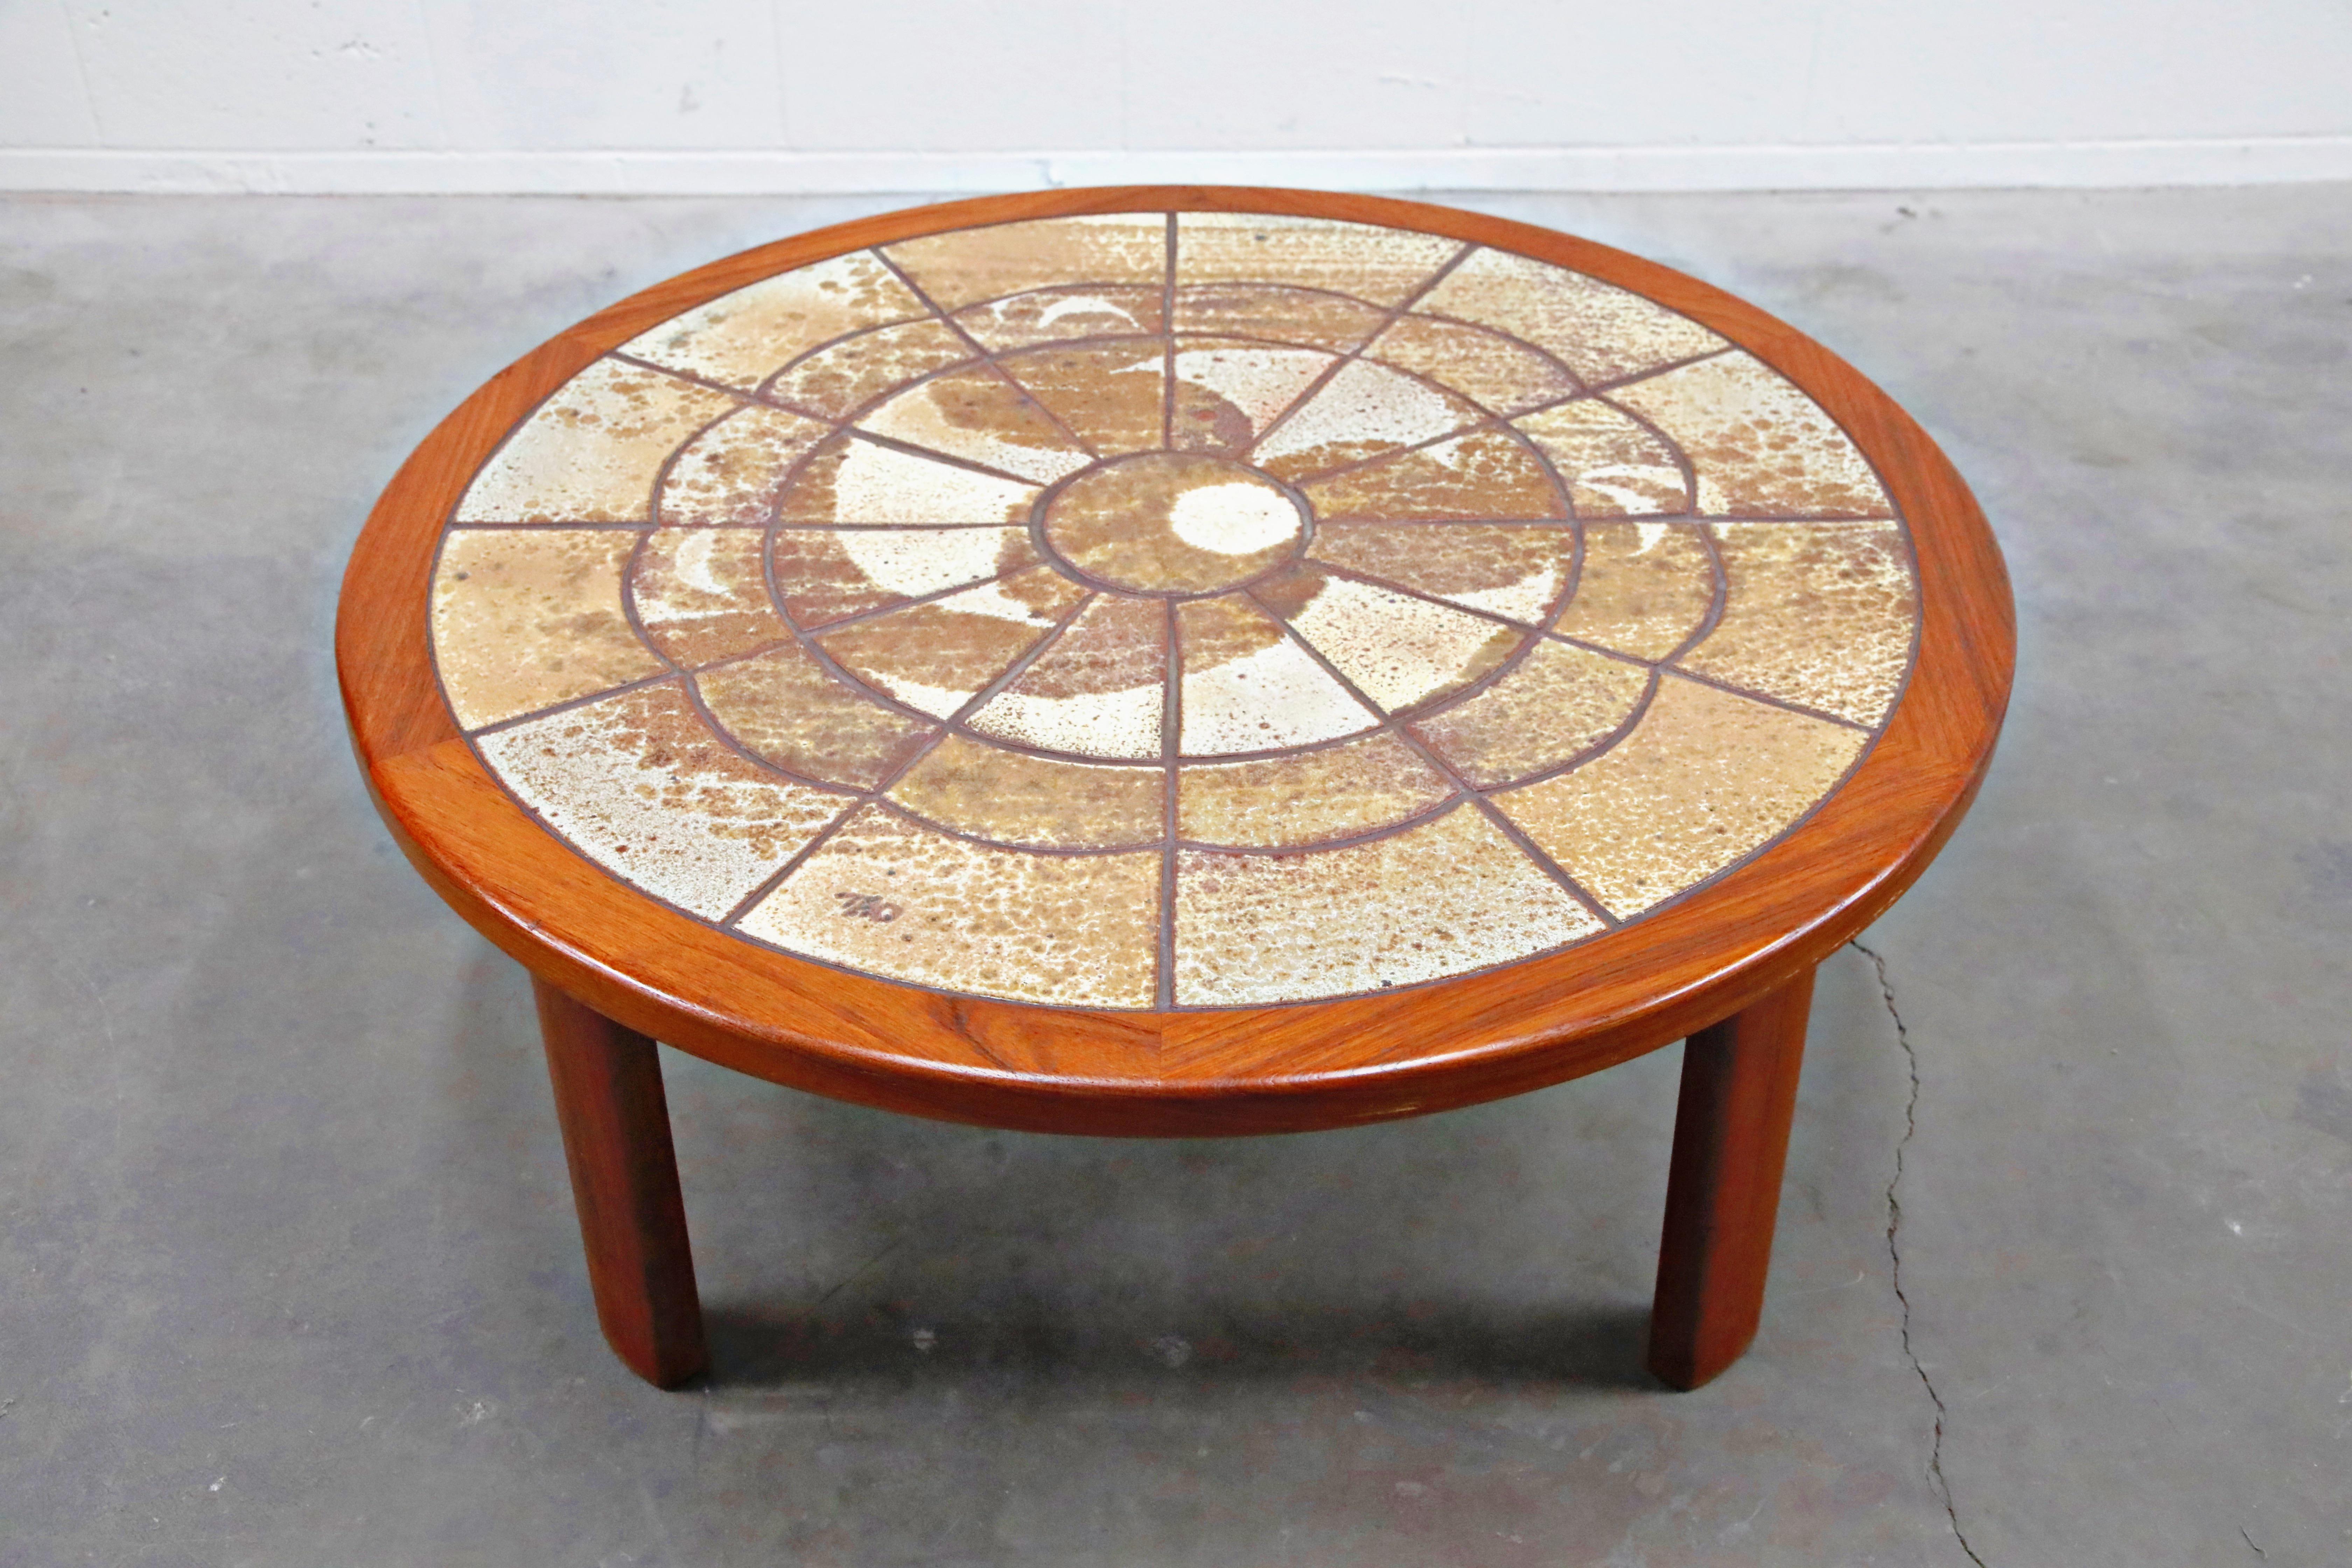 Scandinavian Roger Capron Style Round Teak Coffee Table with 1960s Ceramic Tile, Signed